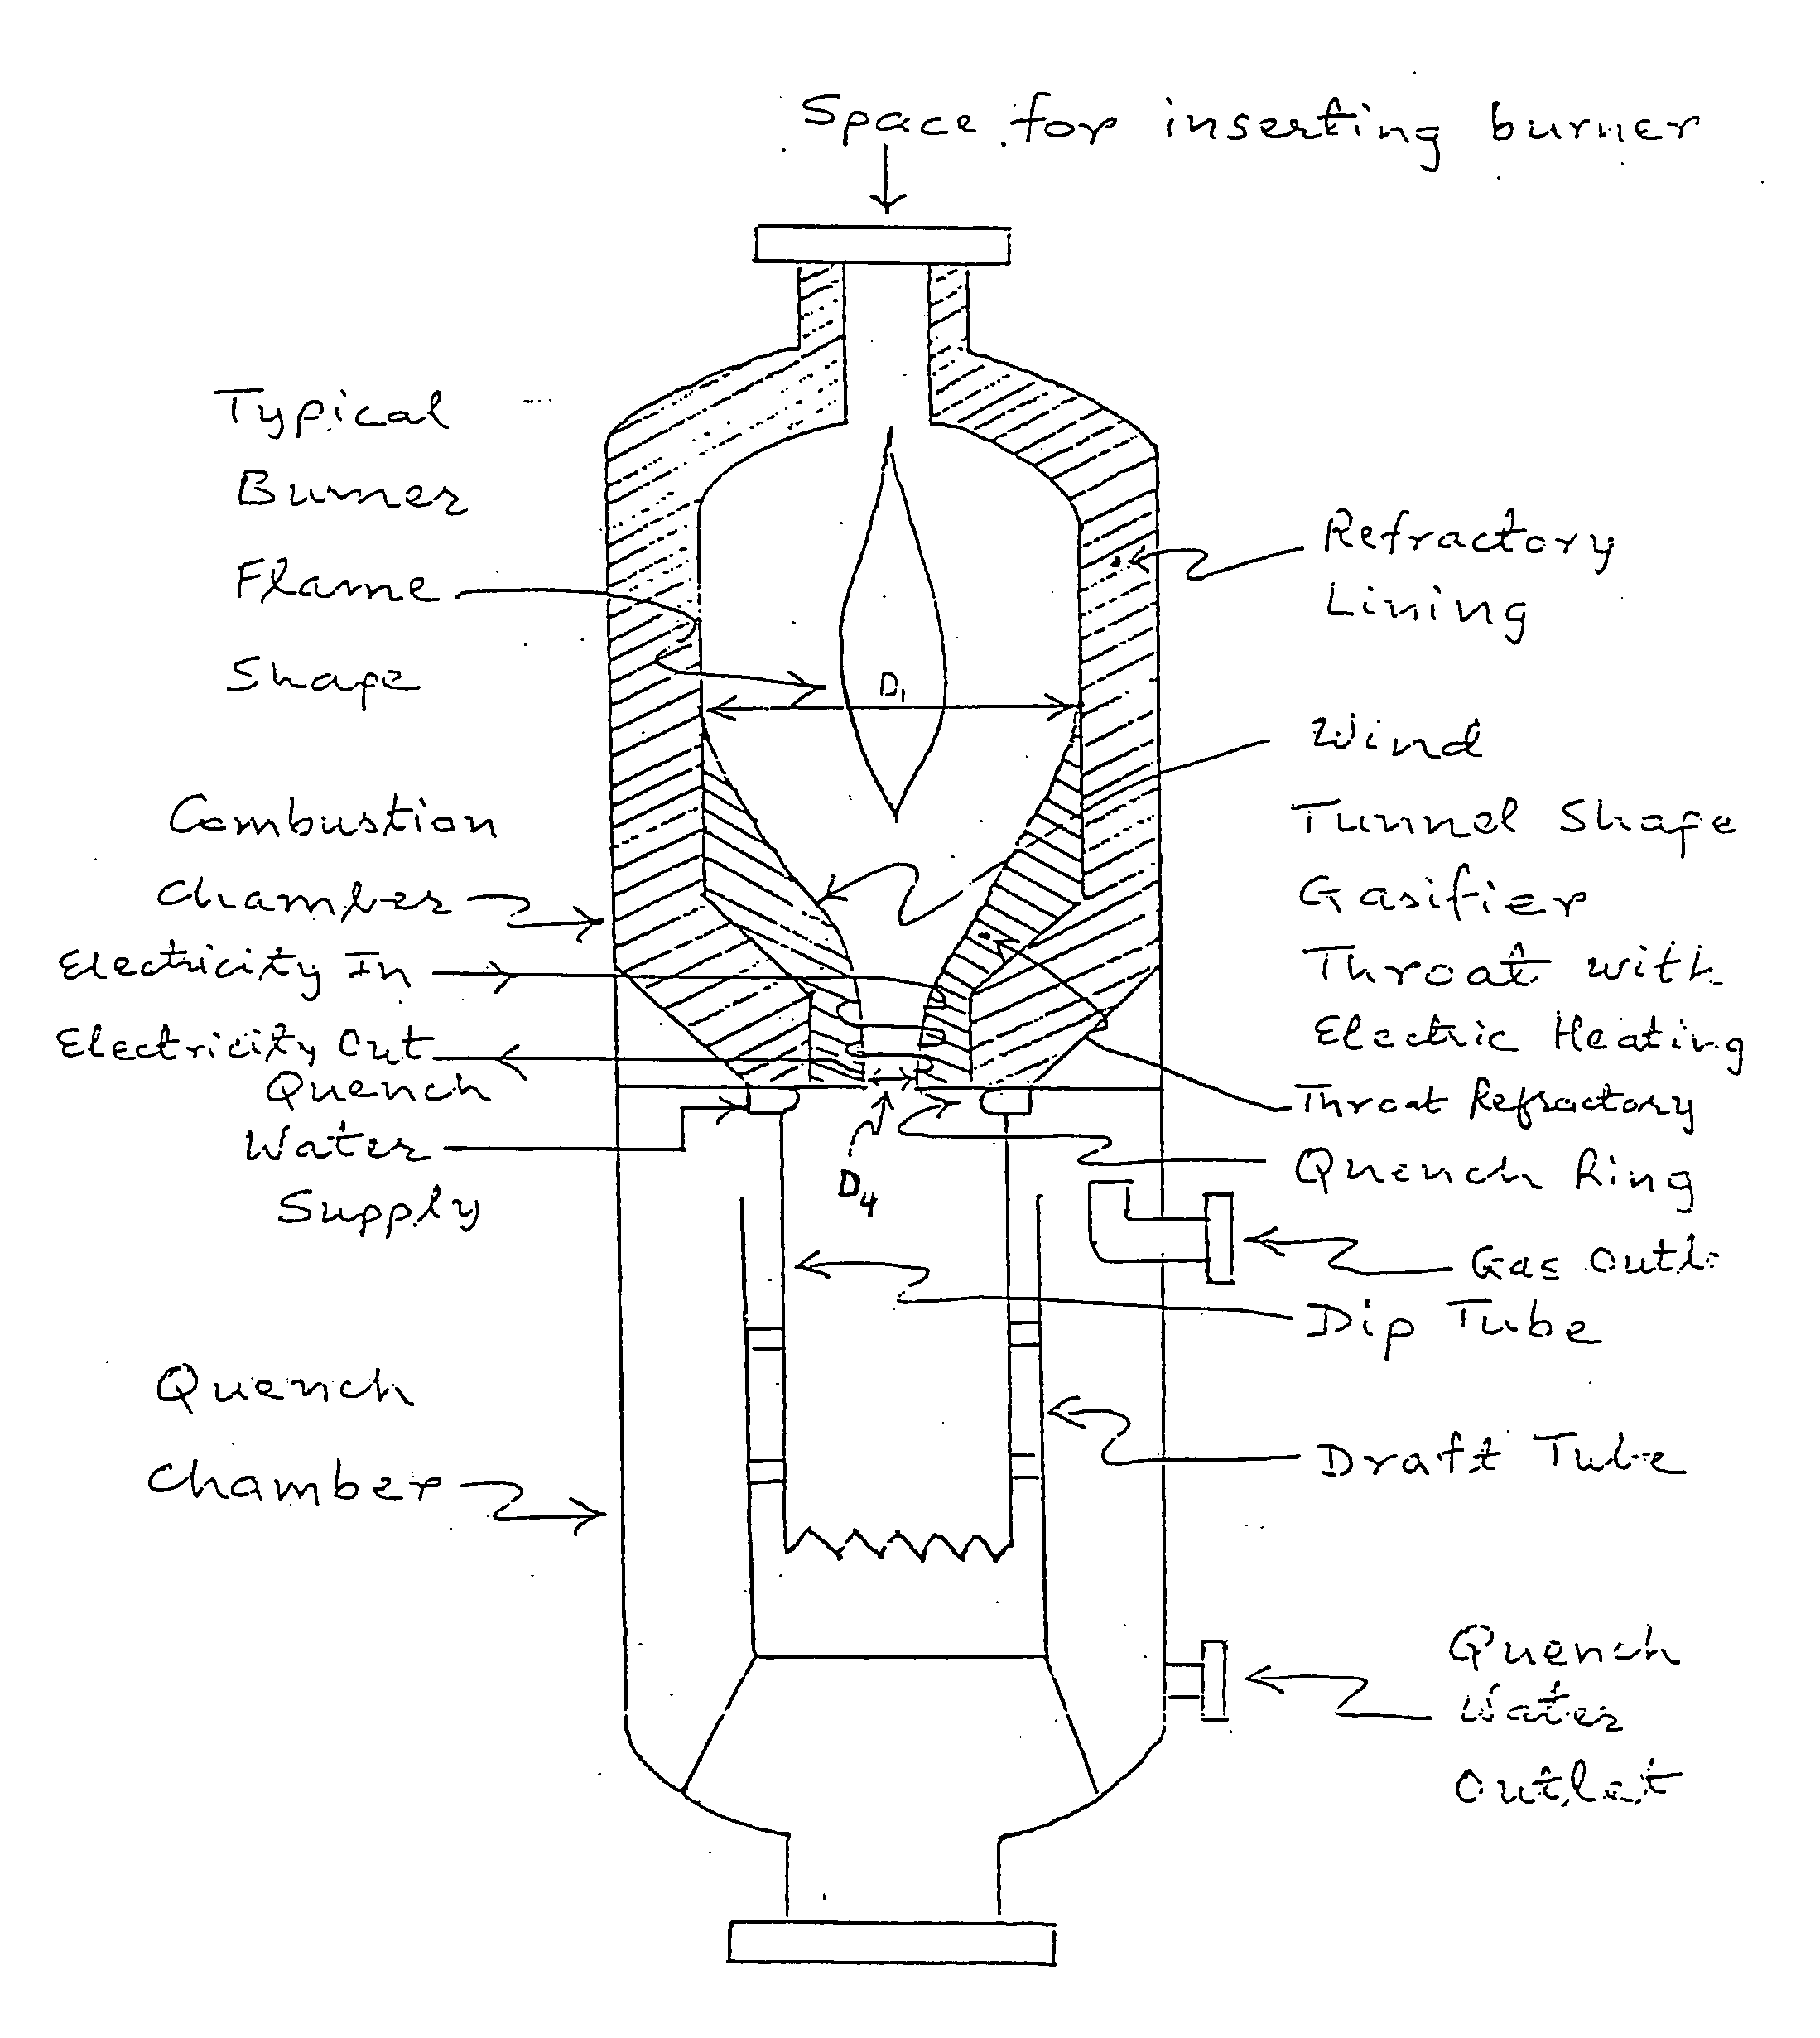 Combustion chamber design for a quench gasifier